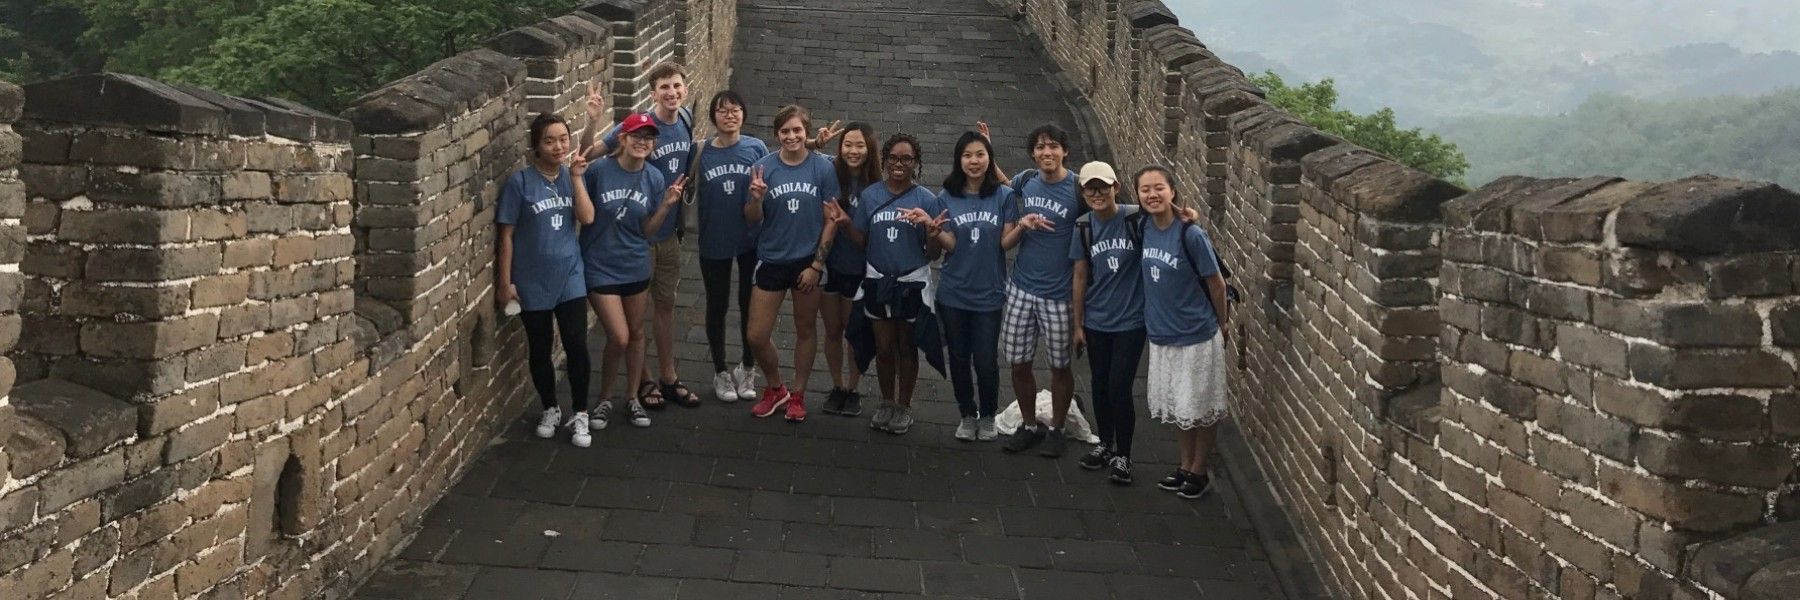 Lucas Adams joins classmates in visiting the Great Wall of China.